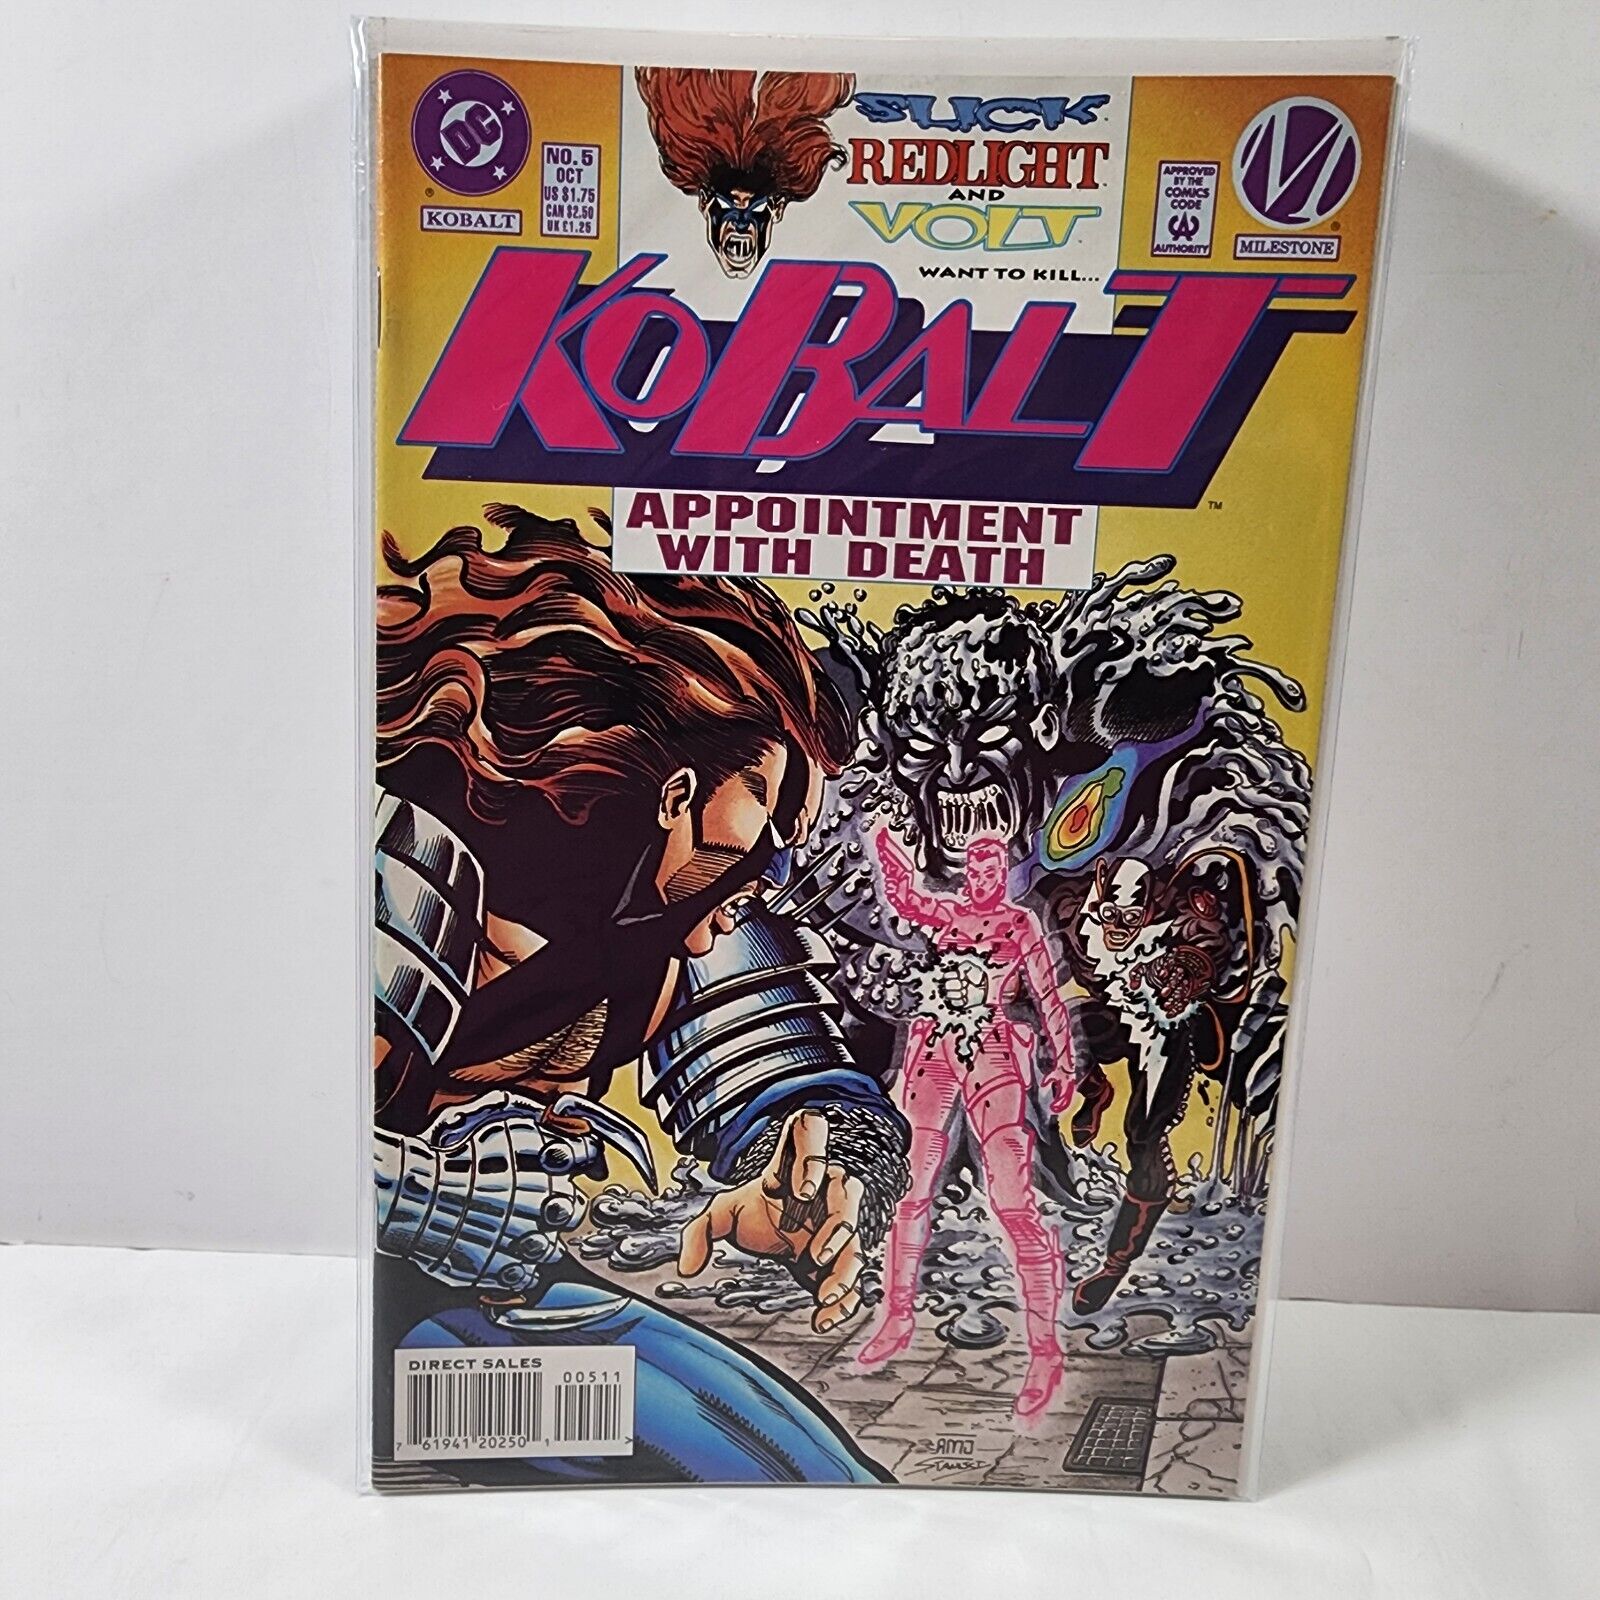 Kobalt #5 Appointment with Death 1994 DC Comics